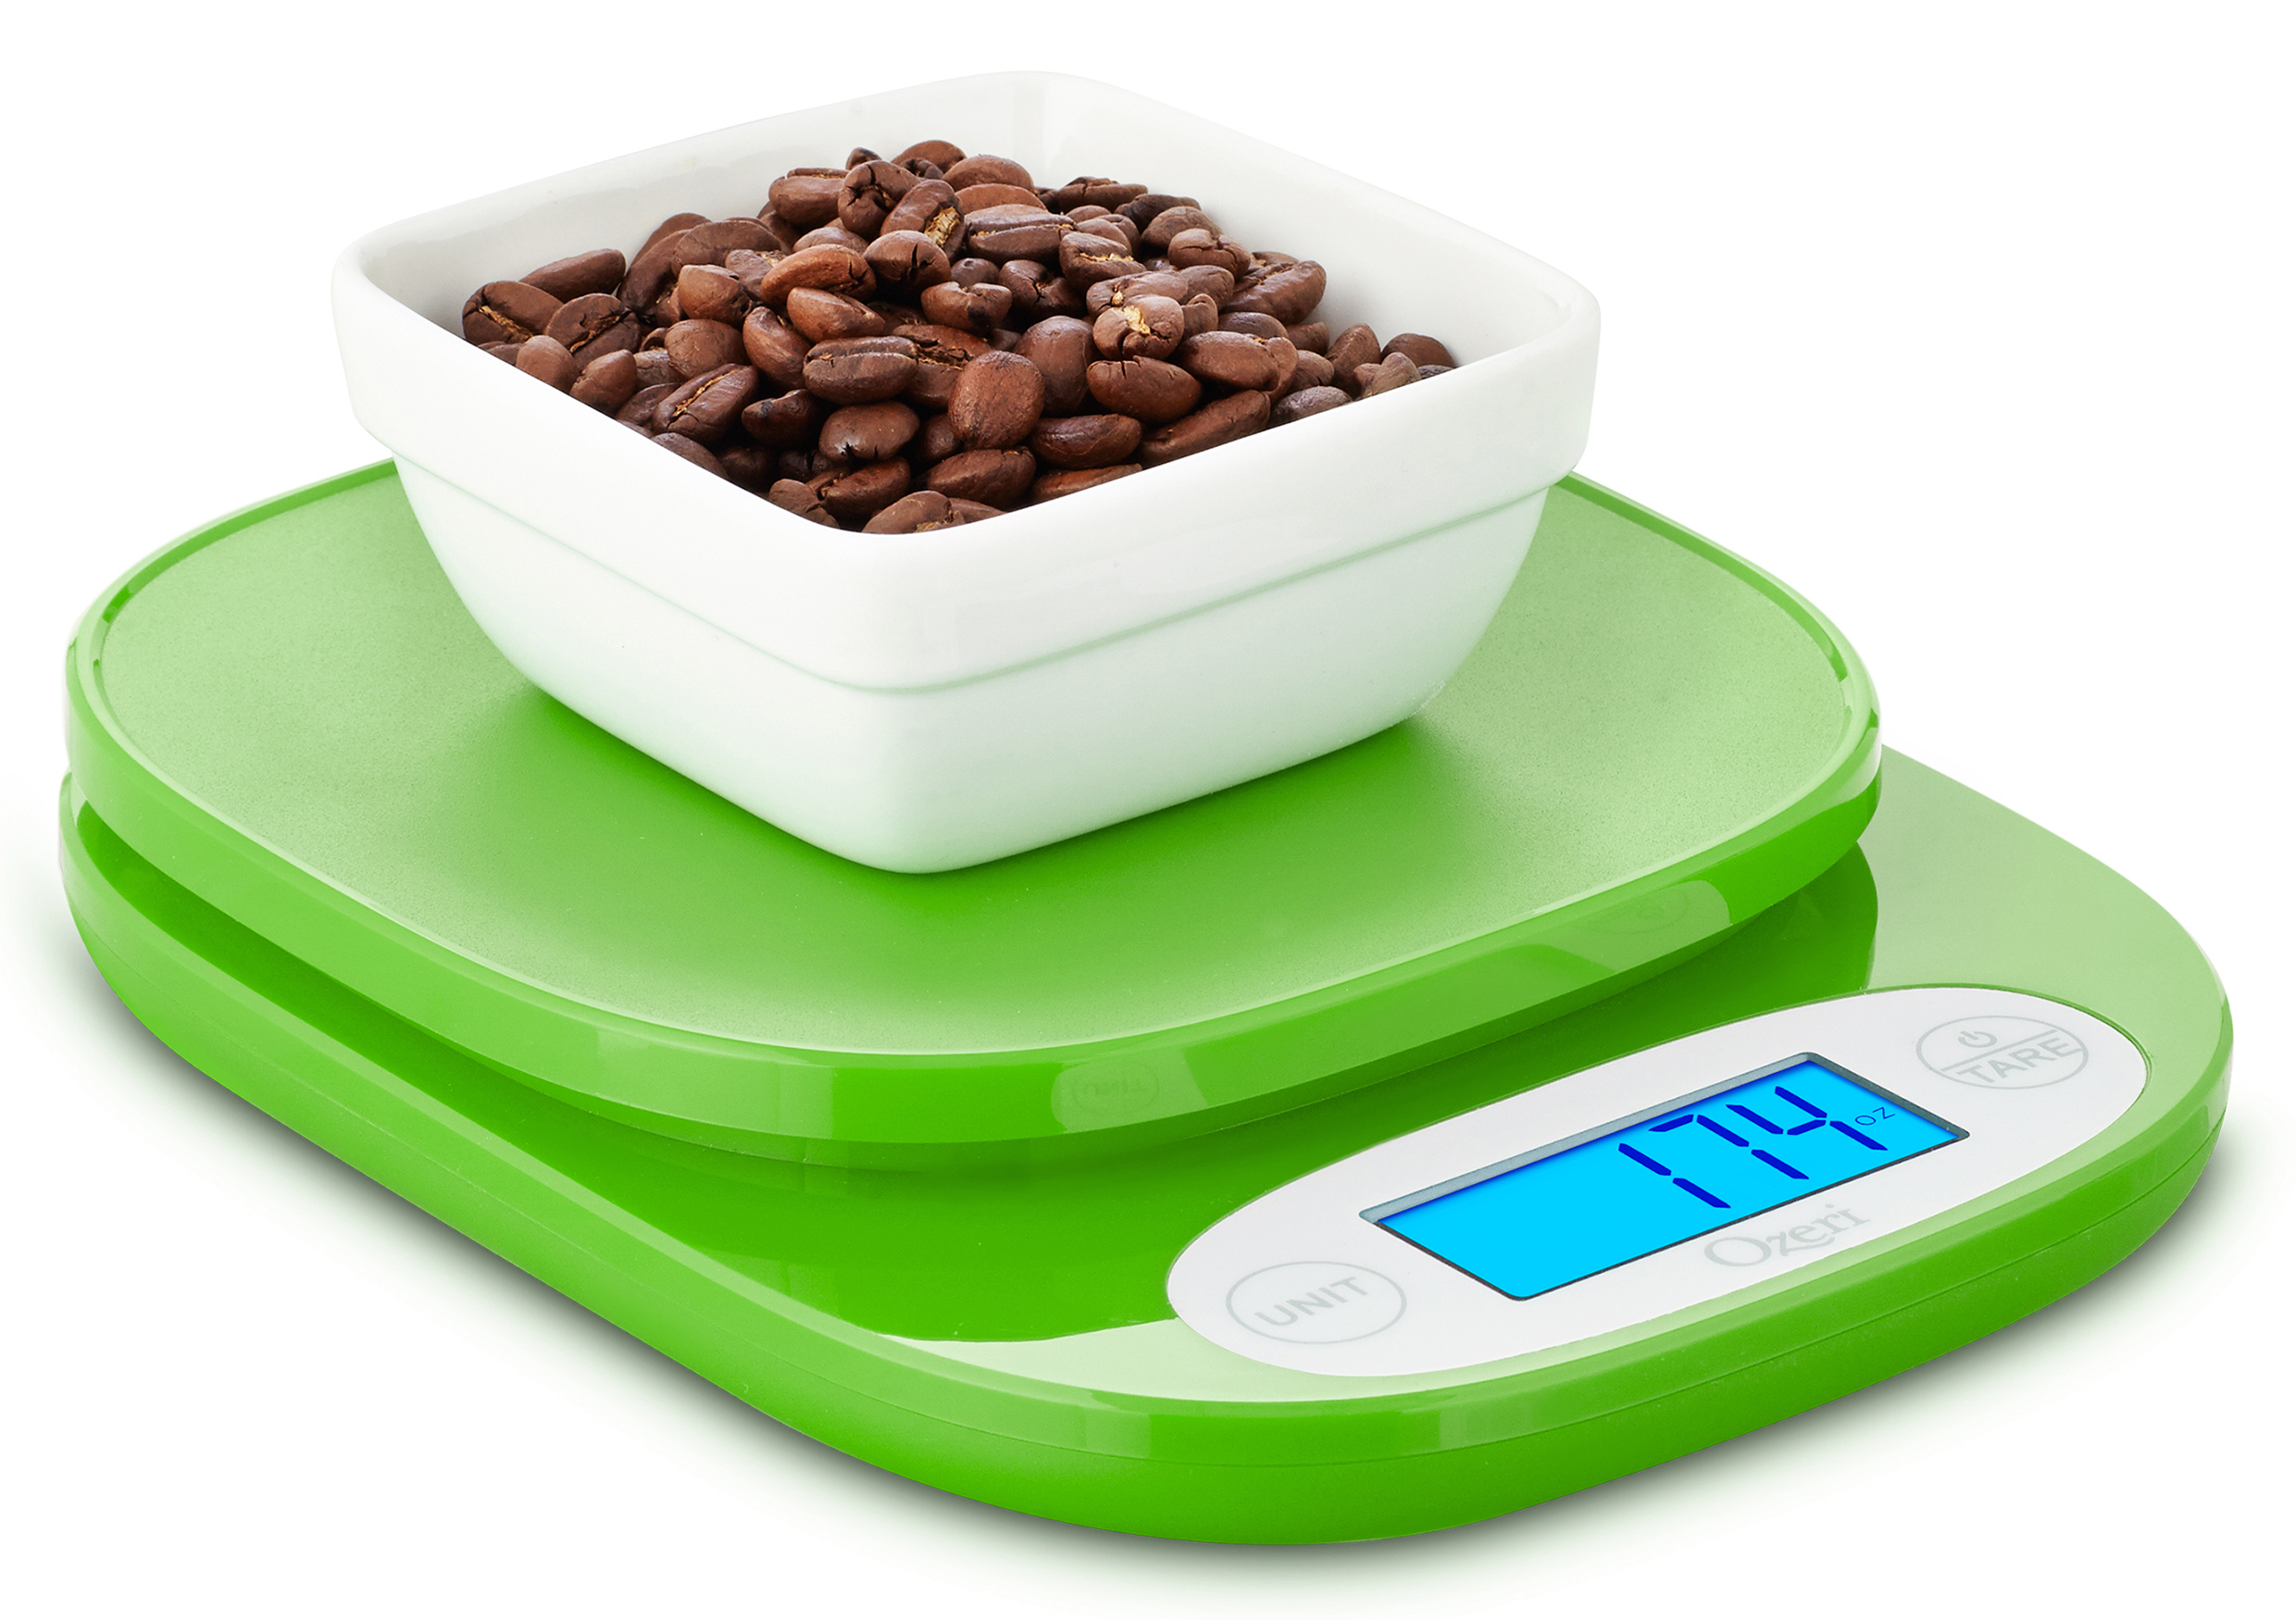 Ozeri ZK24 Garden and Kitchen Scale, with 0.5 g (0.01 oz) Precision Weighing Technology - image 3 of 5